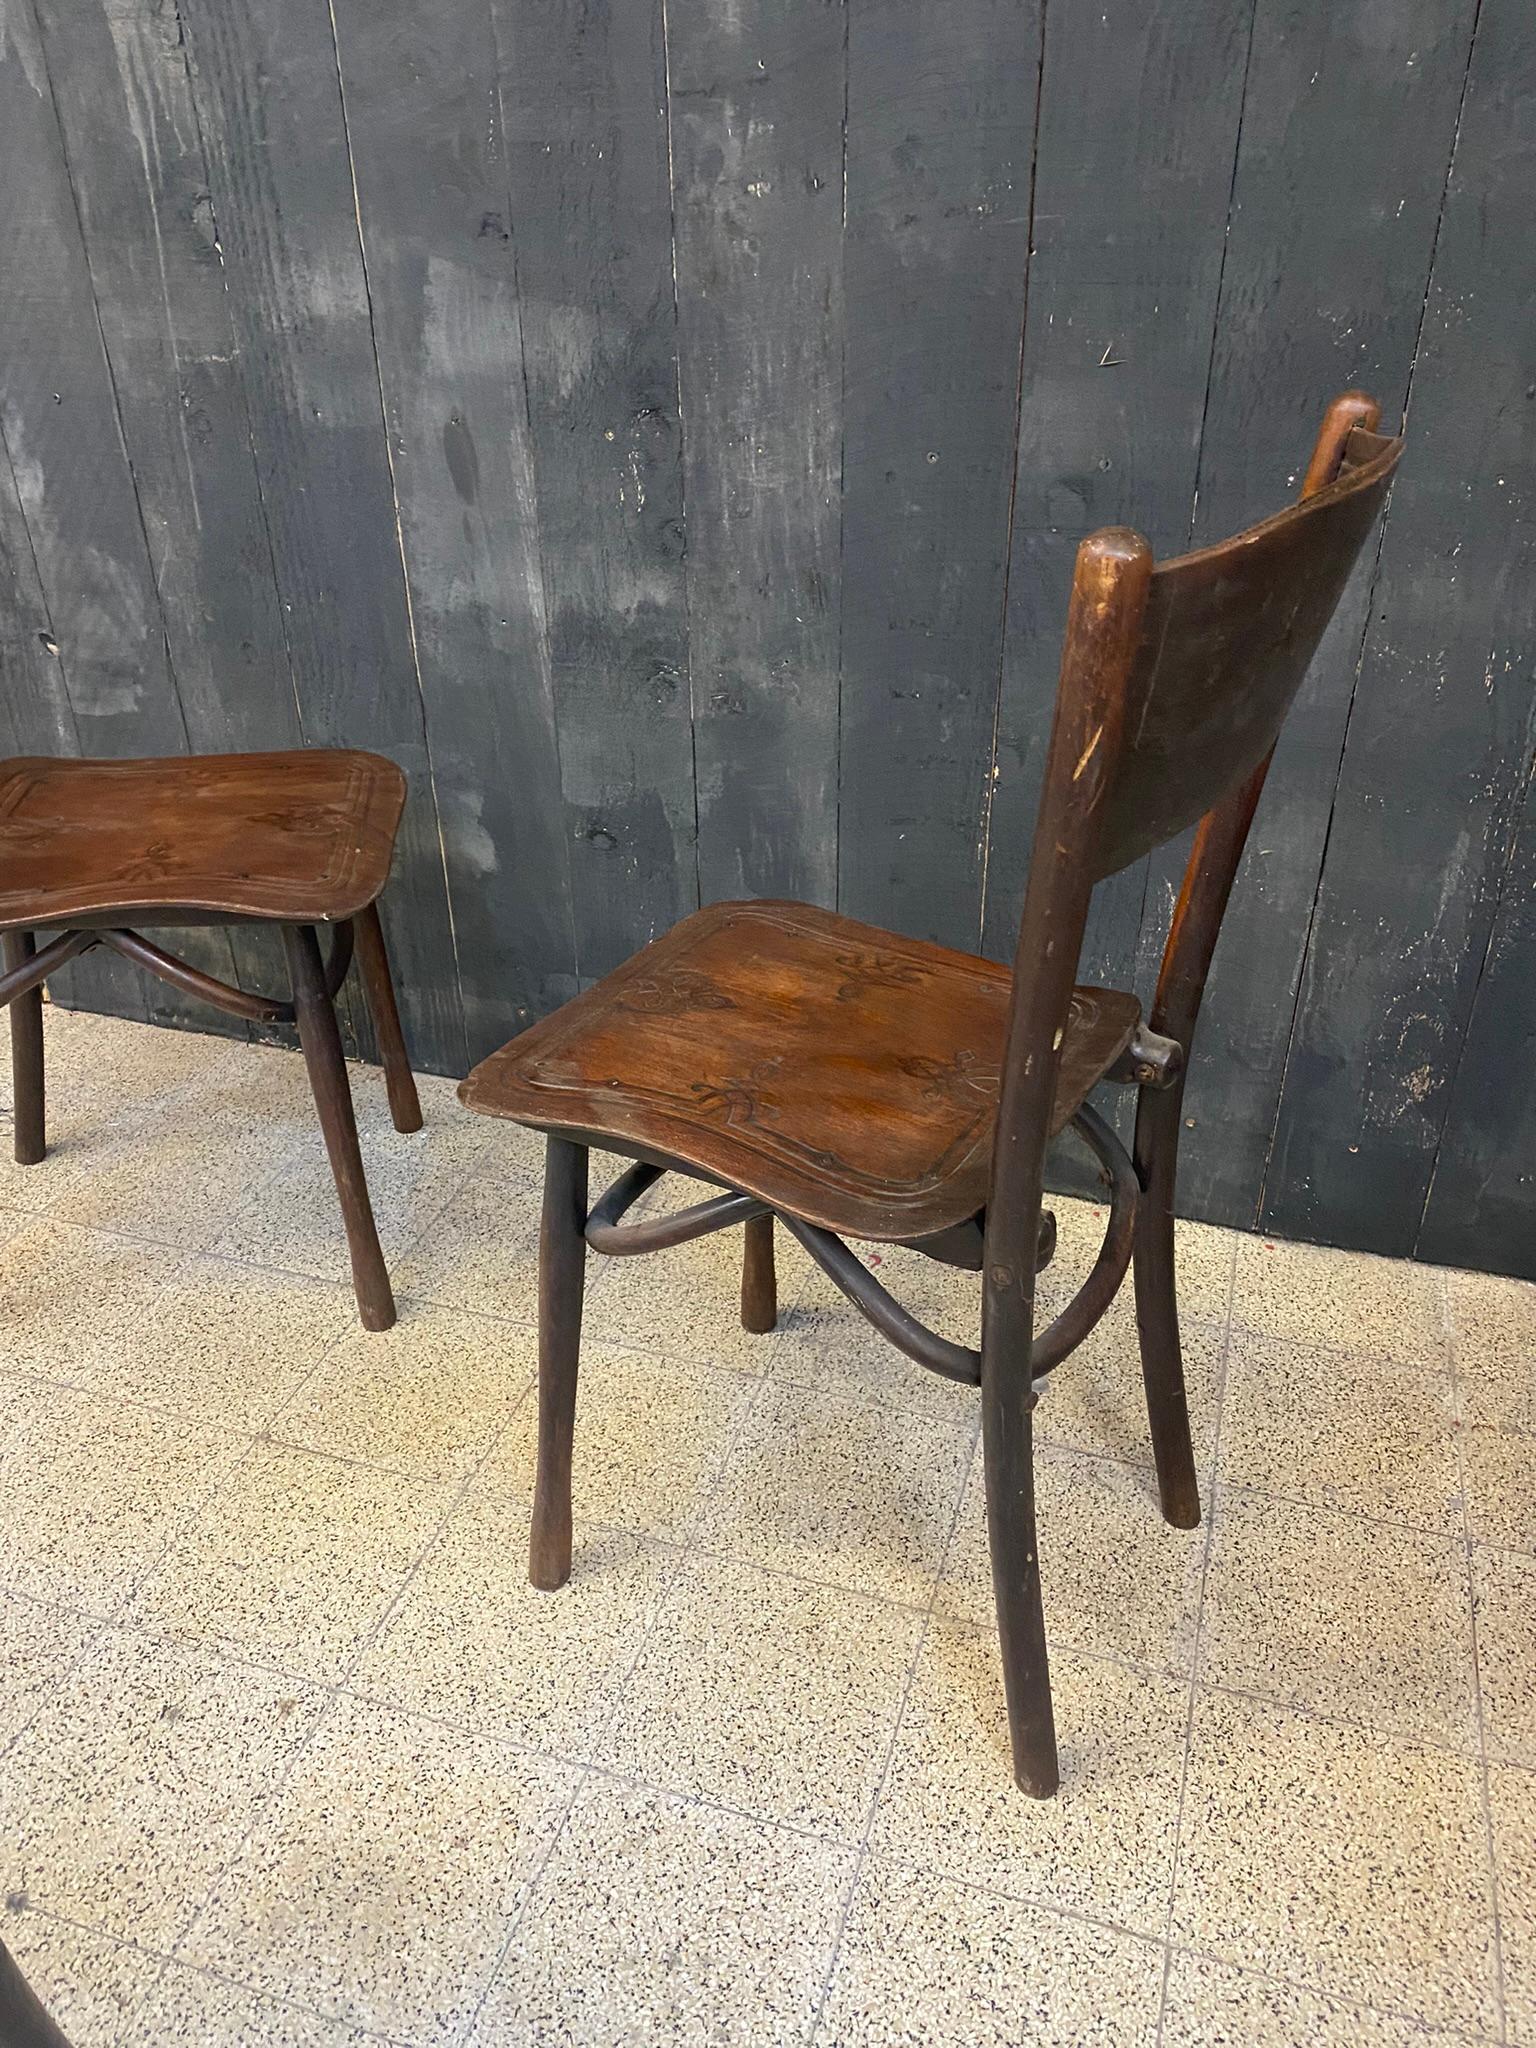 Beech 4 Antique Chairs from Jacob & Josef Kohn, circa 1900 For Sale